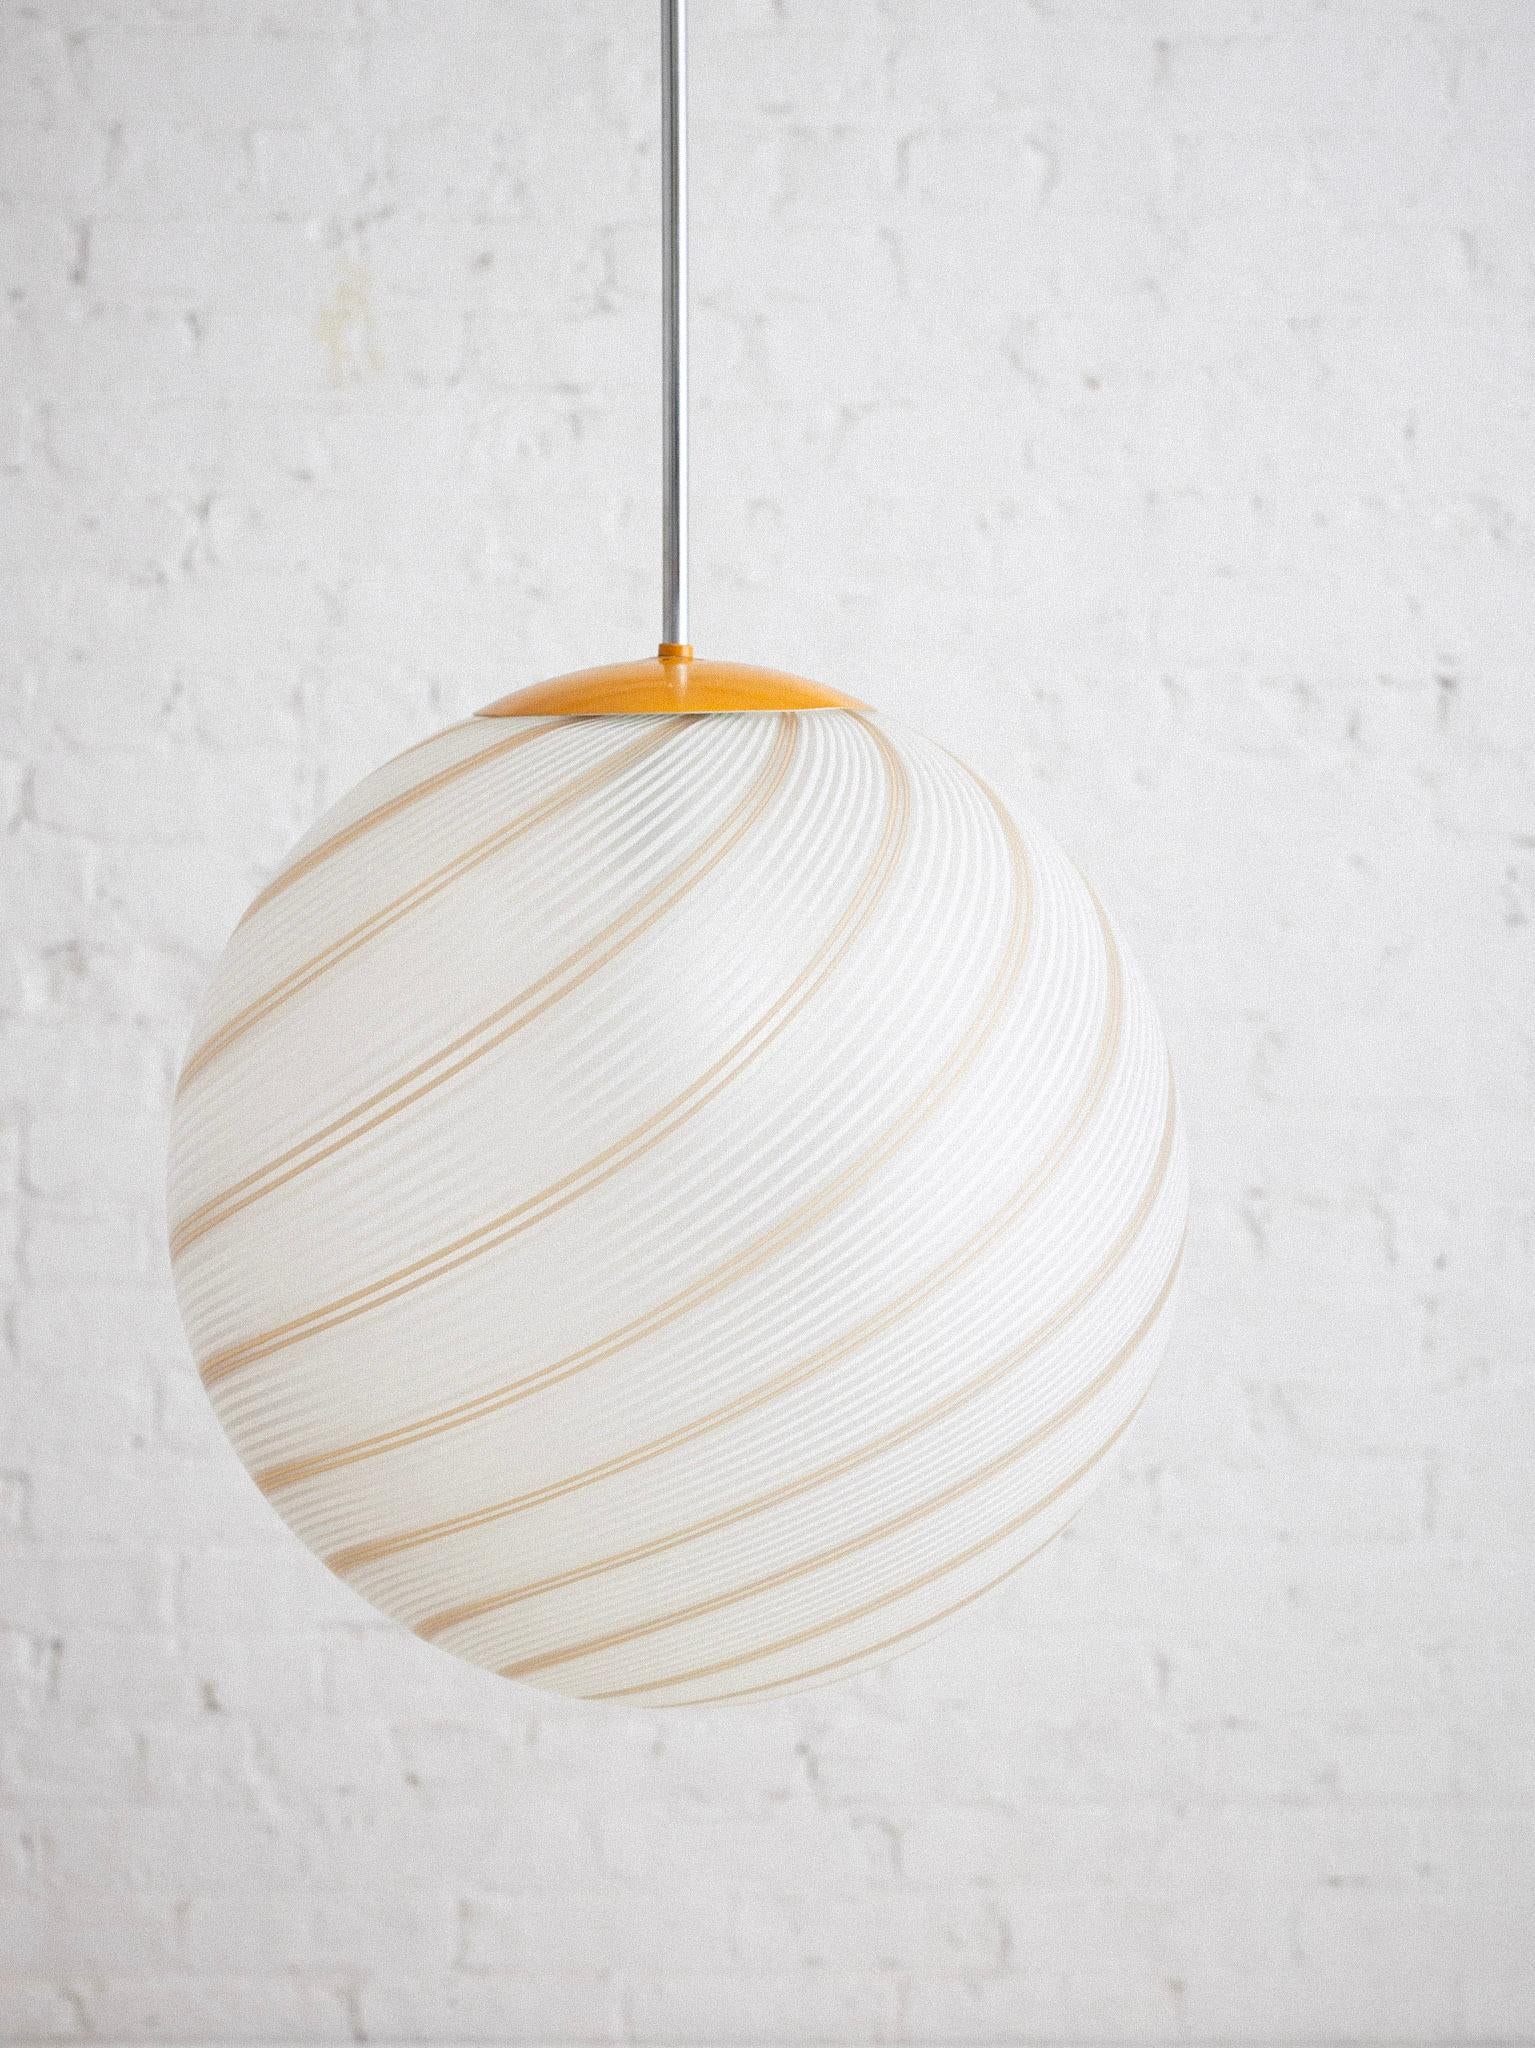 An Italian Murano glass globe pendant light. White and tan spiral pattern with frosted finish. Original chrome and orange coated hardware. Original wiring as found. Sourced in Northern Italy.

Globe measures 16” in diameter. 